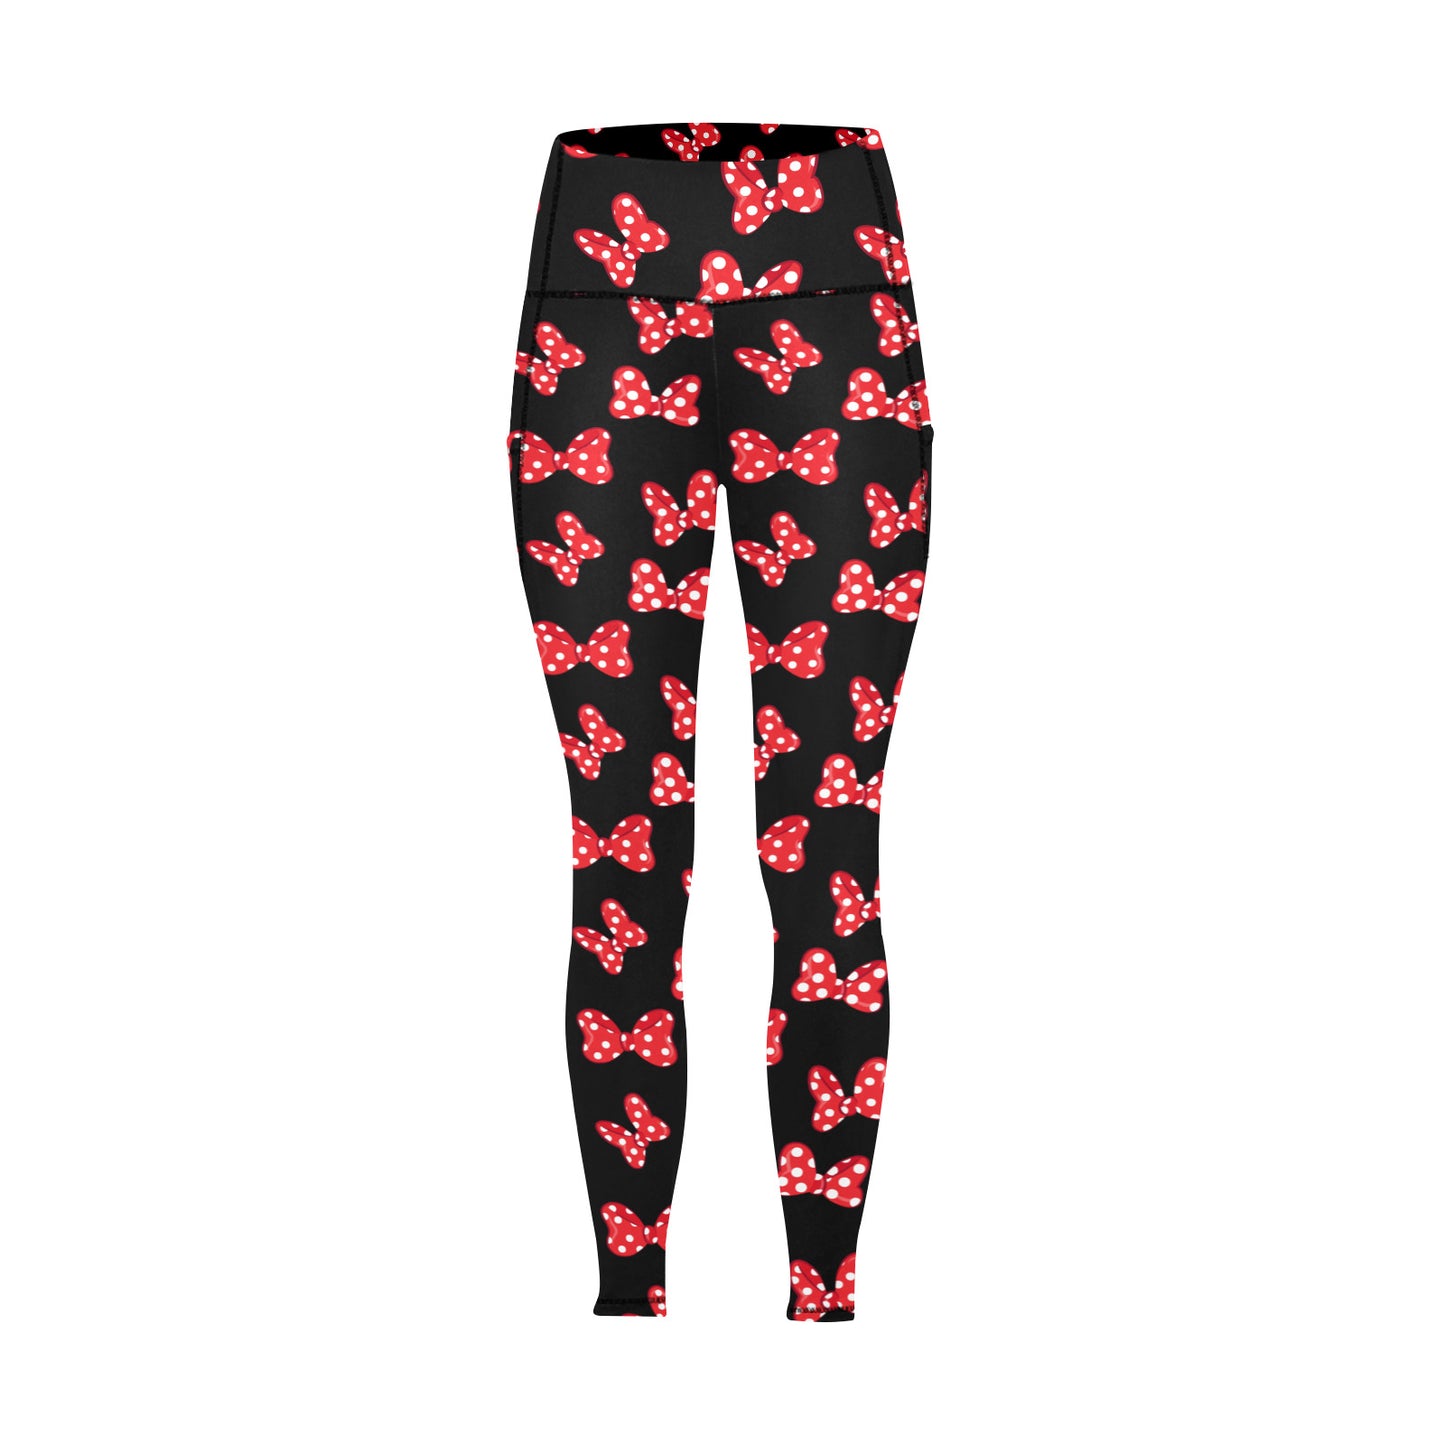 Polka Dot Bows Women's Athletic Leggings With Pockets